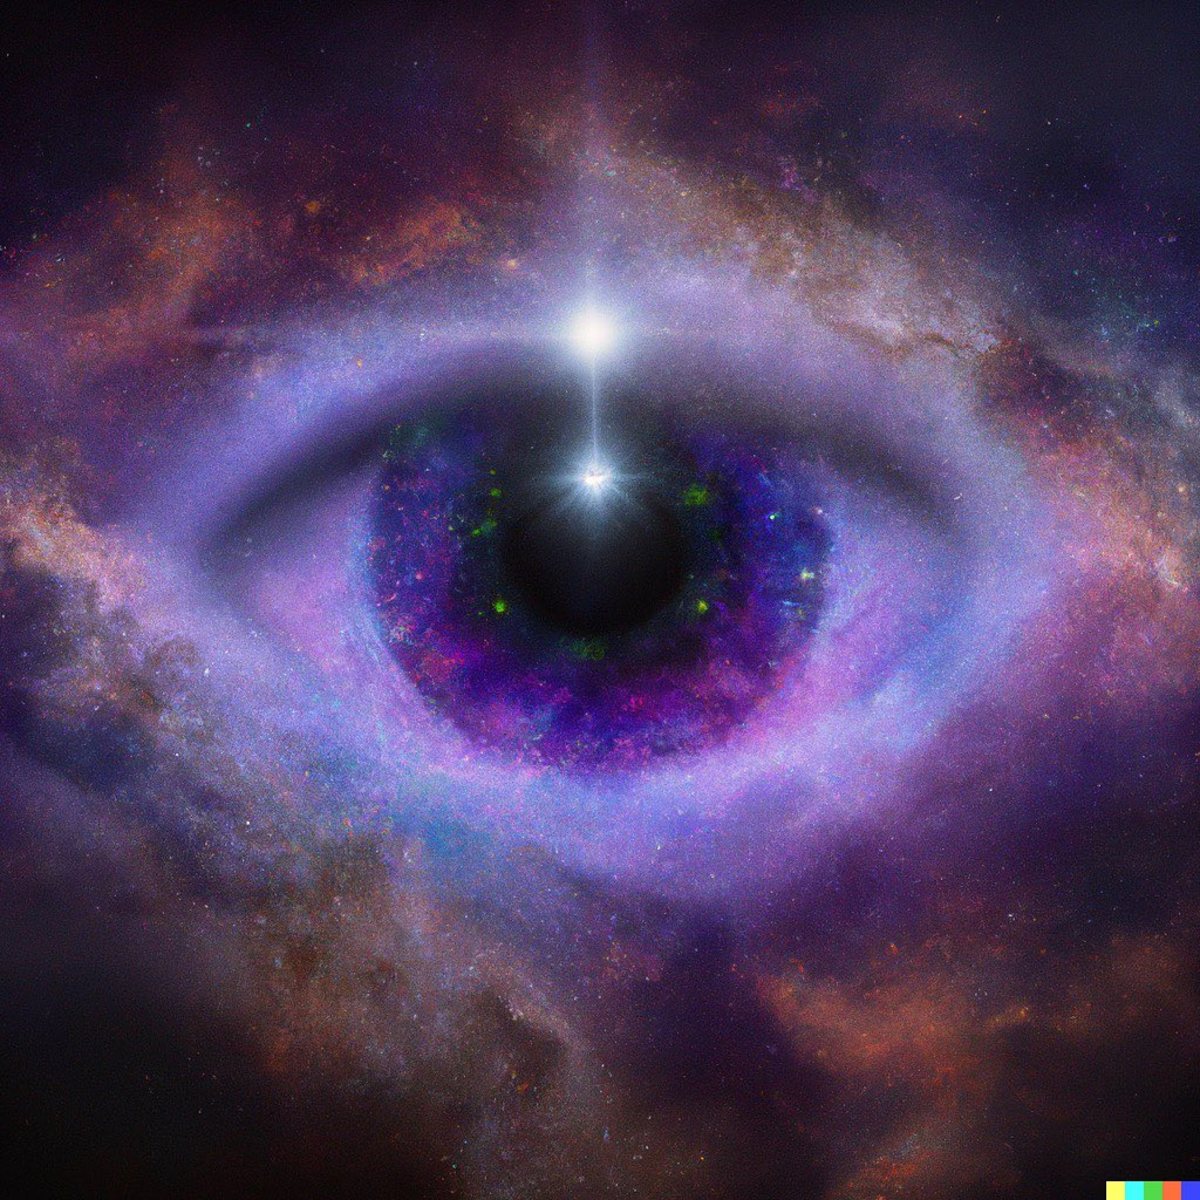 The eye of the spirit of time, emanating light into the cosmos (Actual text prompt used)